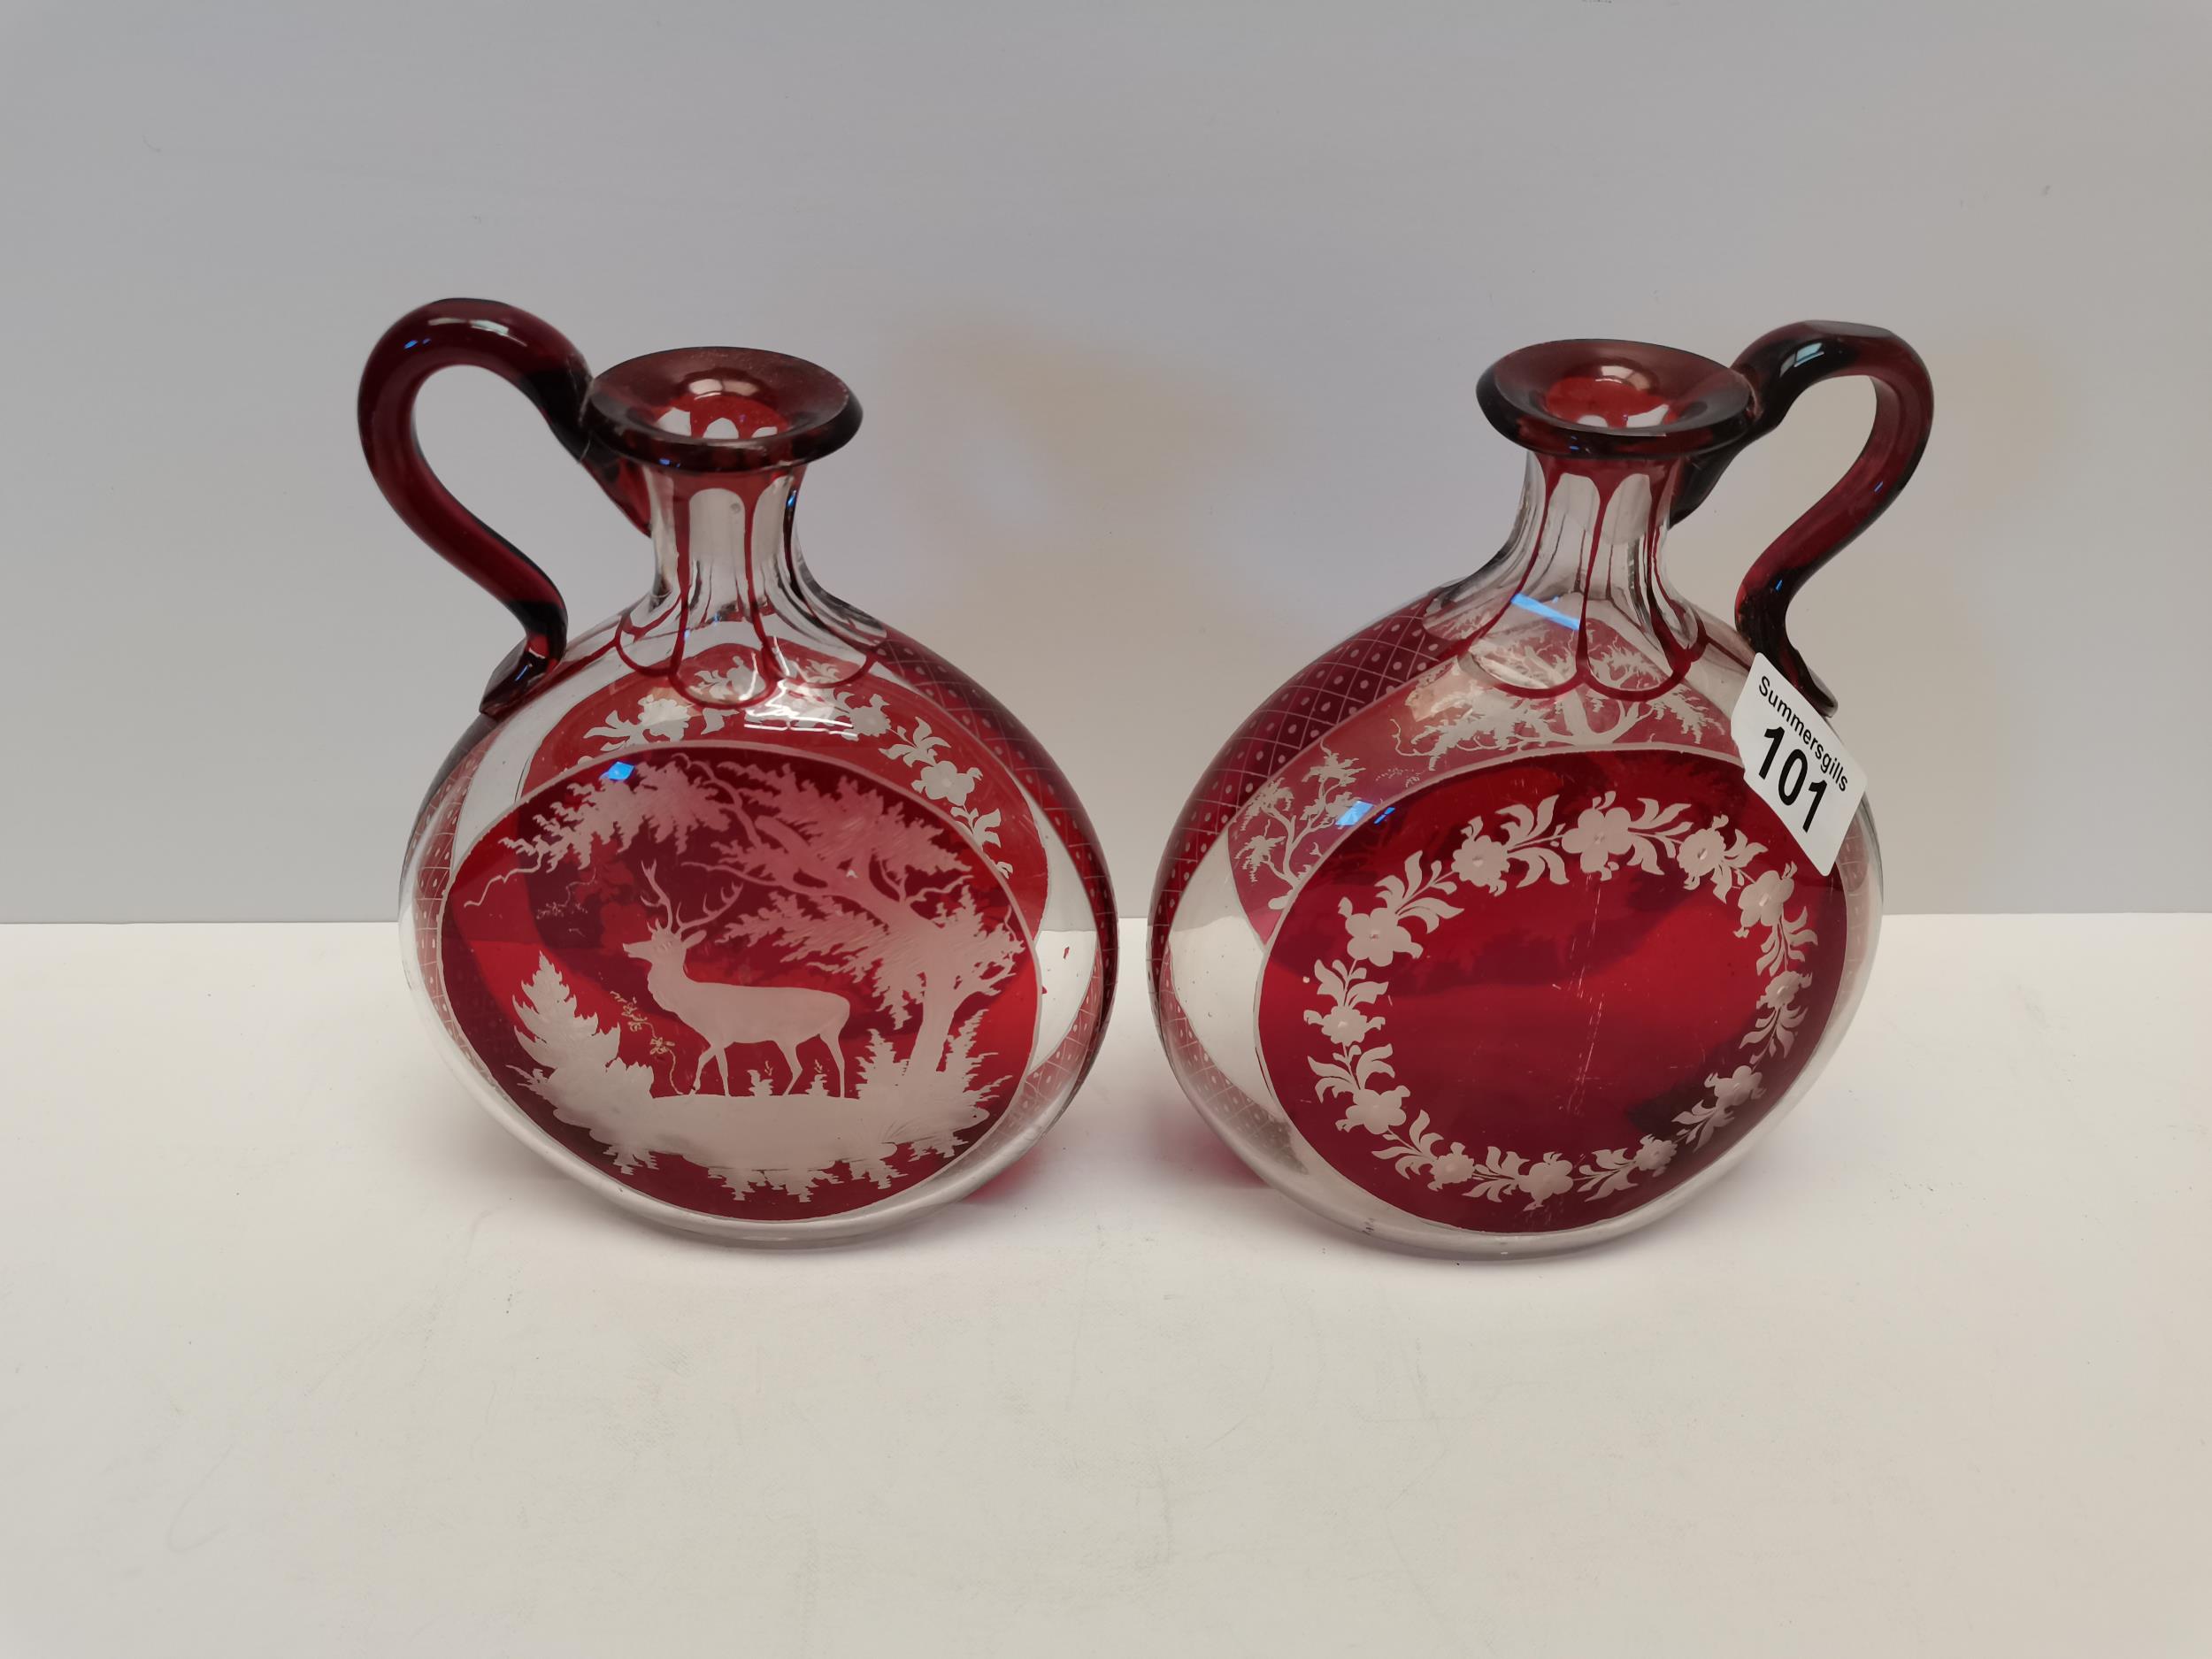 Pair of bohemian red decanters